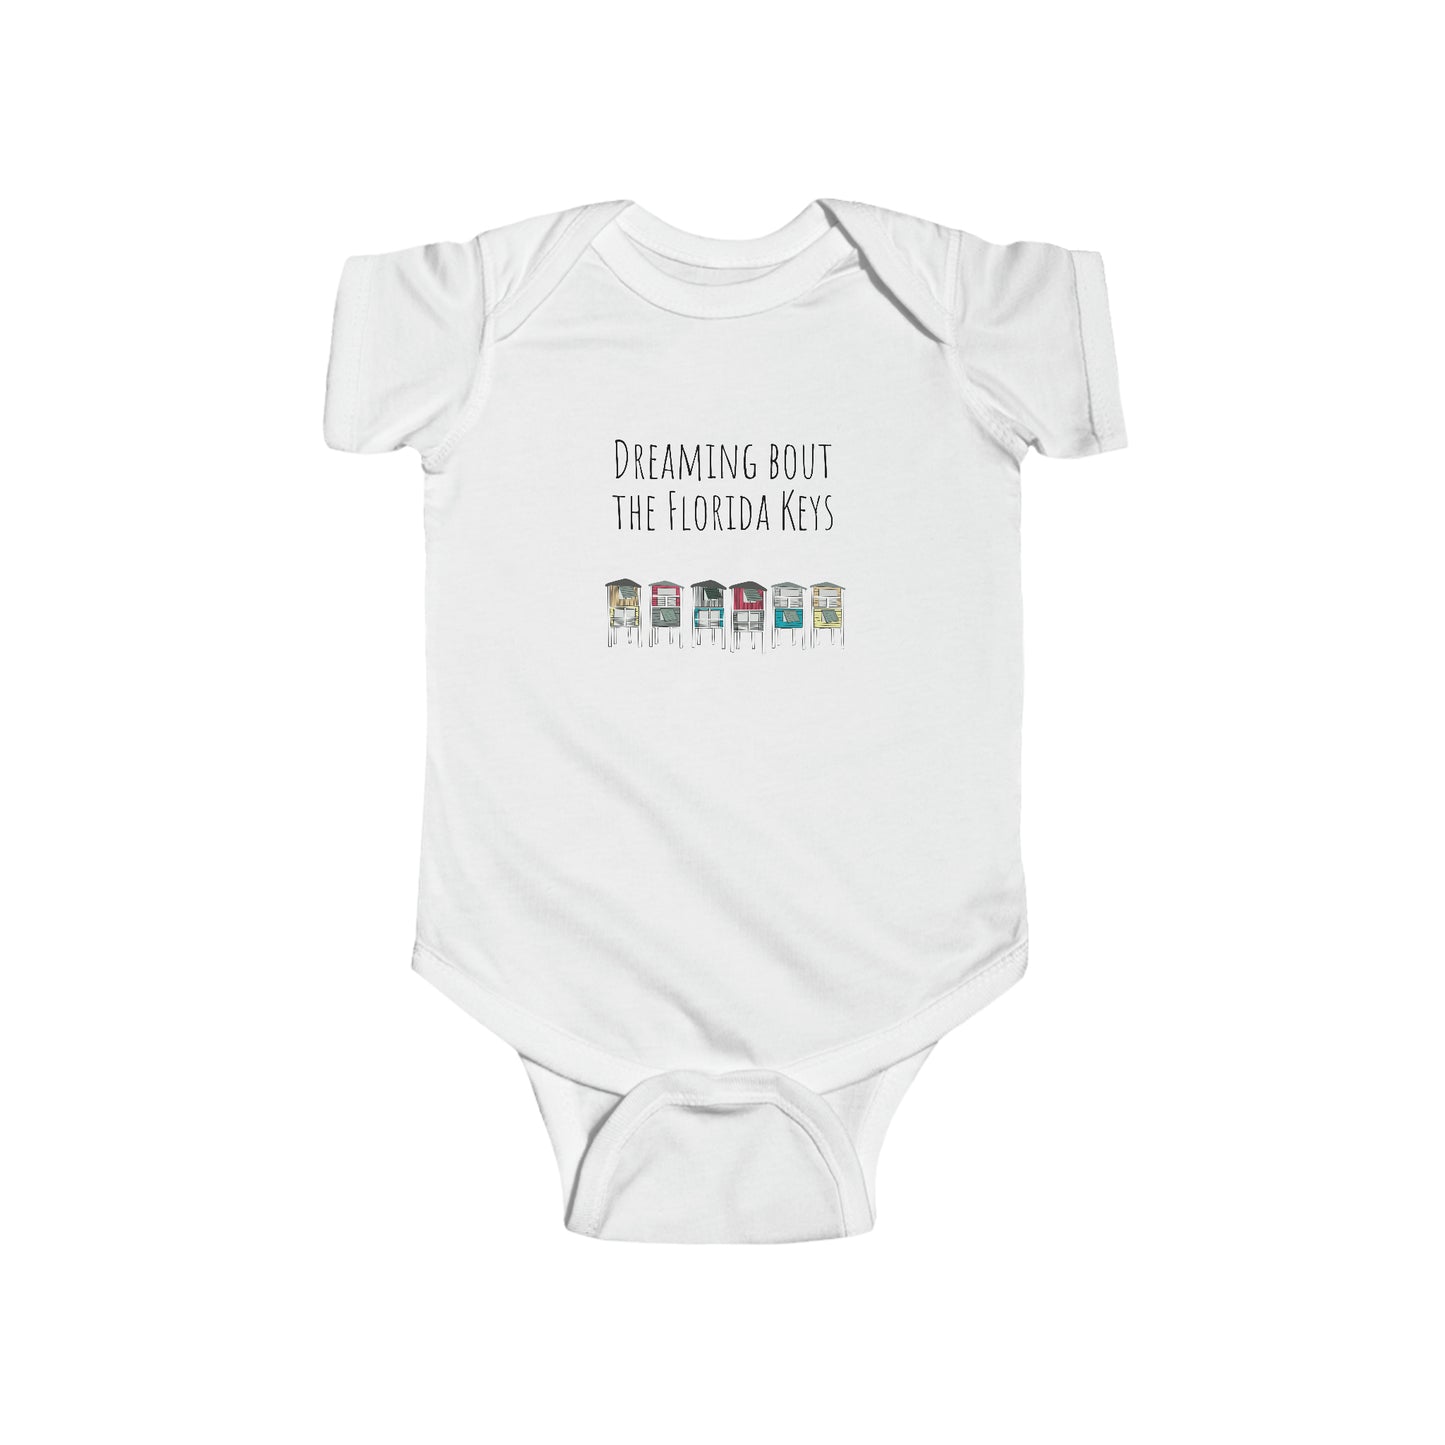 Dreaming bout the Florida Keys - baby onesie